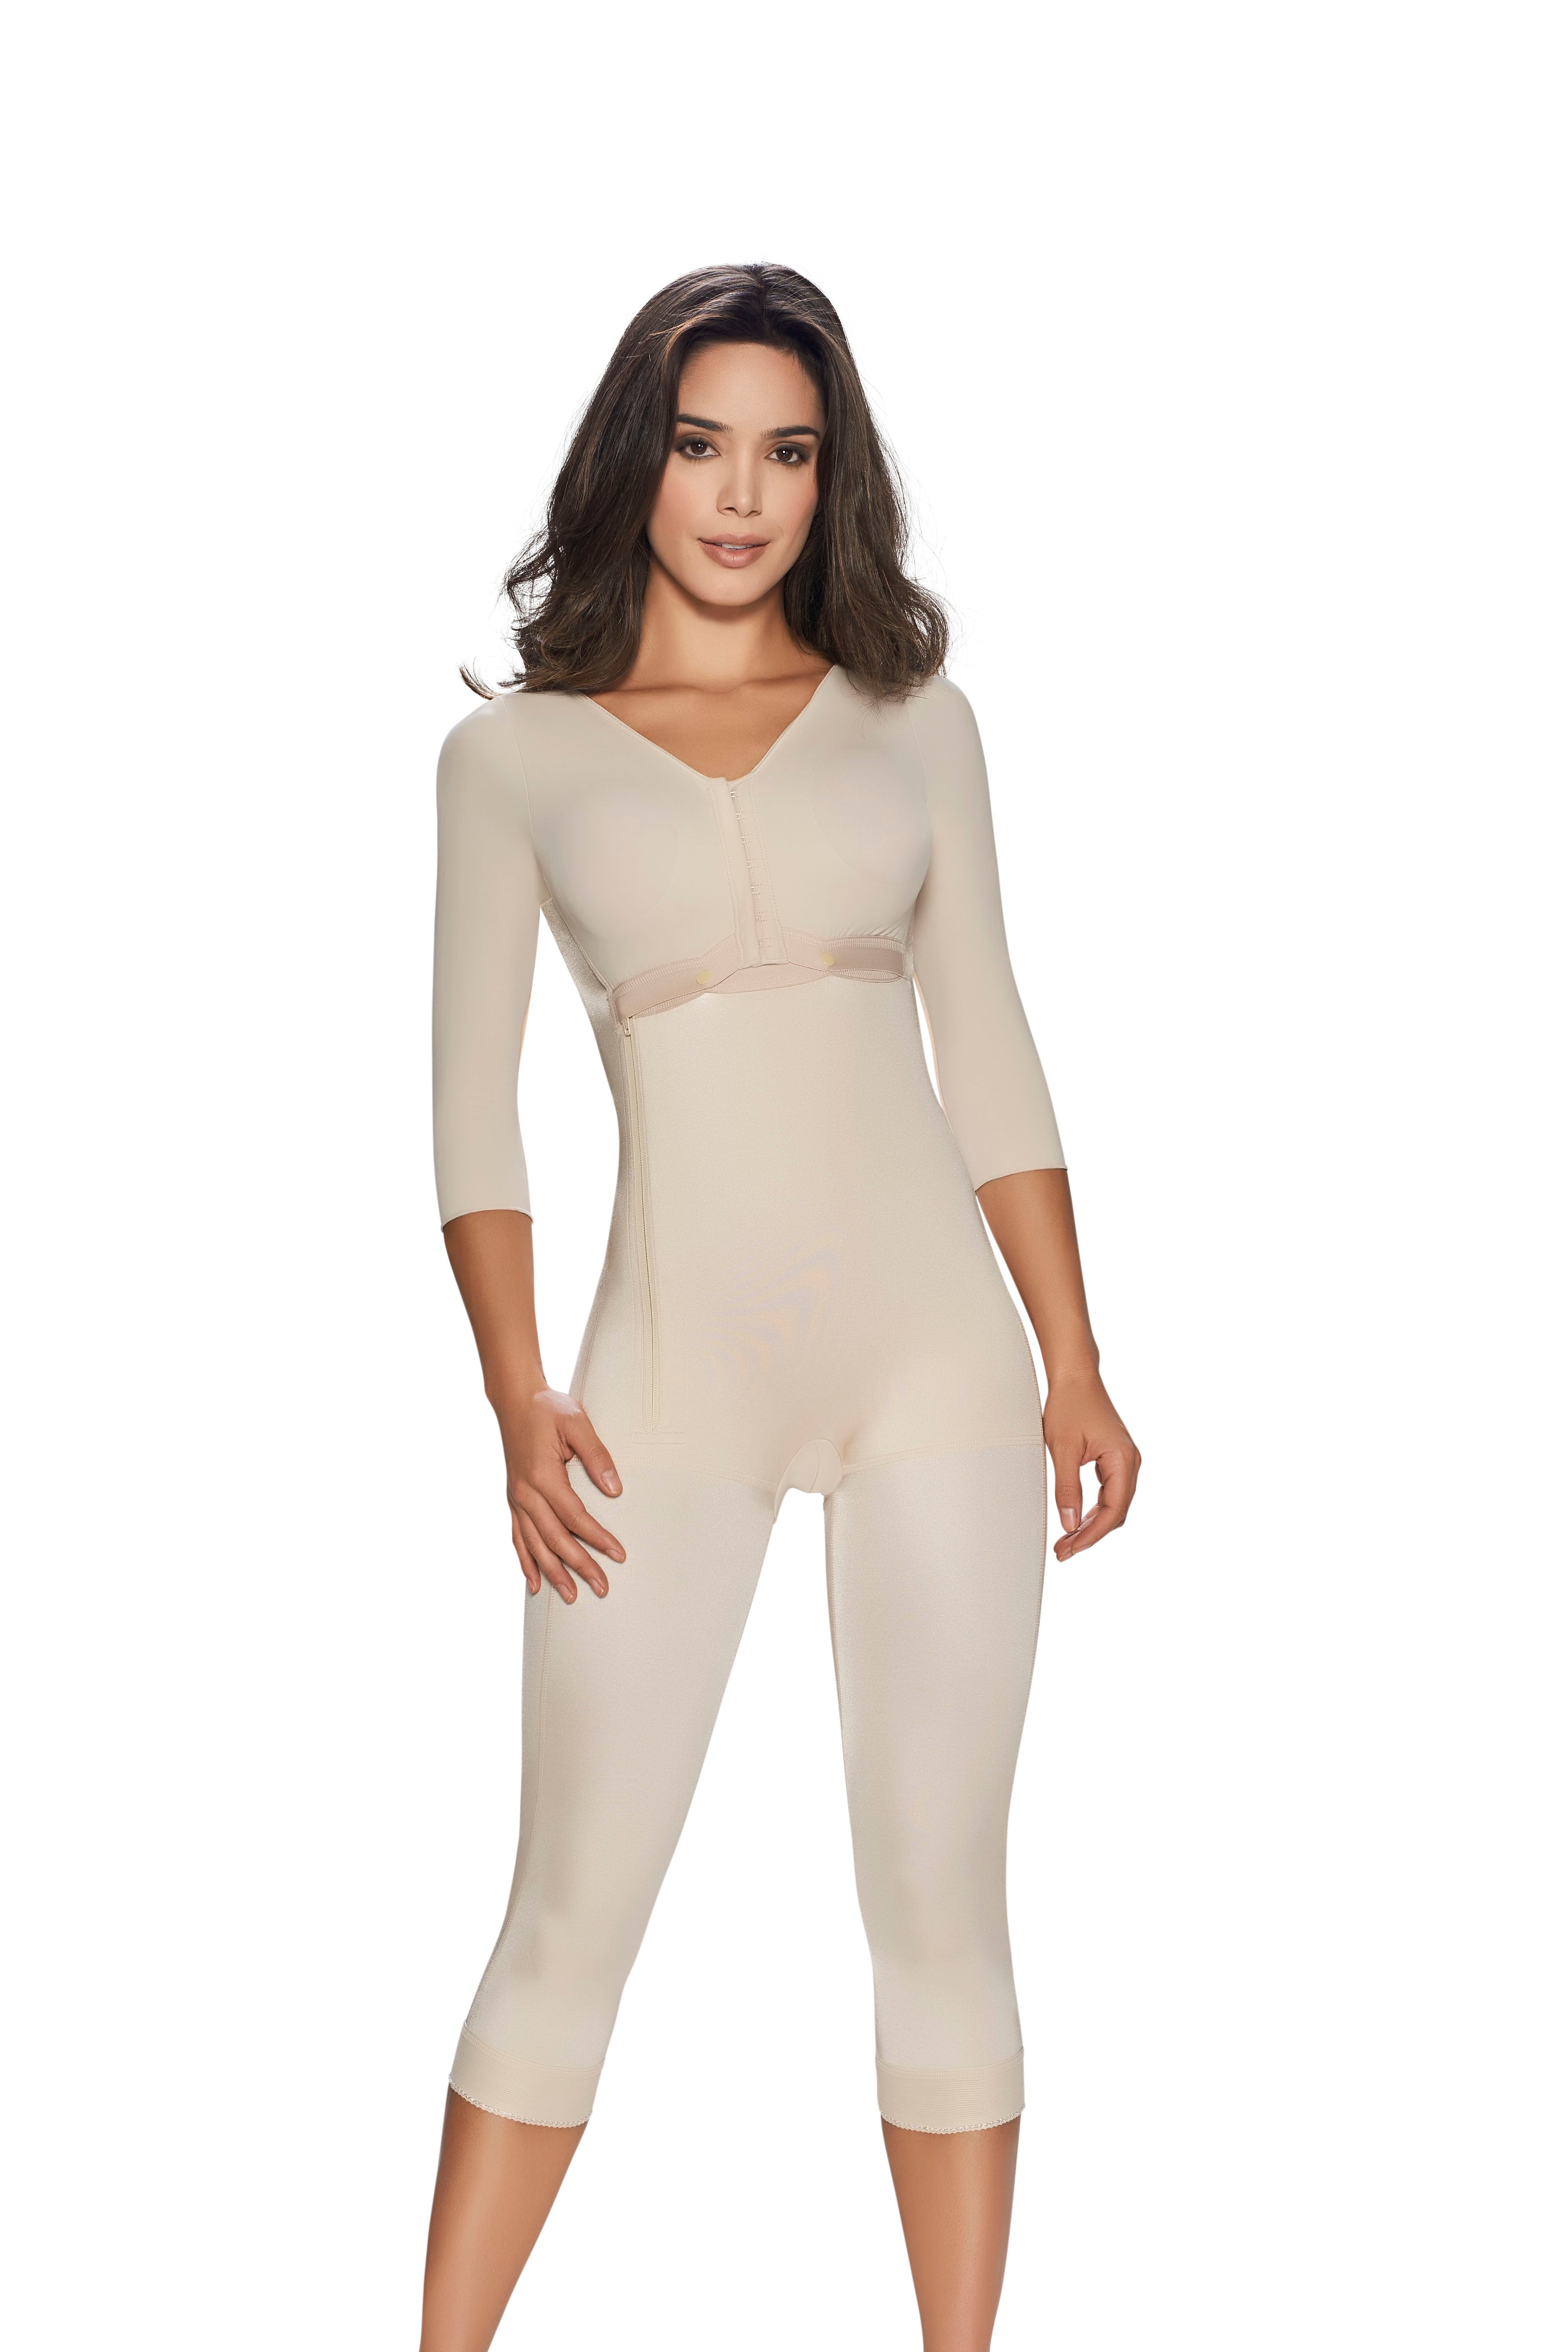 Nude Shapewear - Buy Nude Shapewear Online Starting at Just ₹145